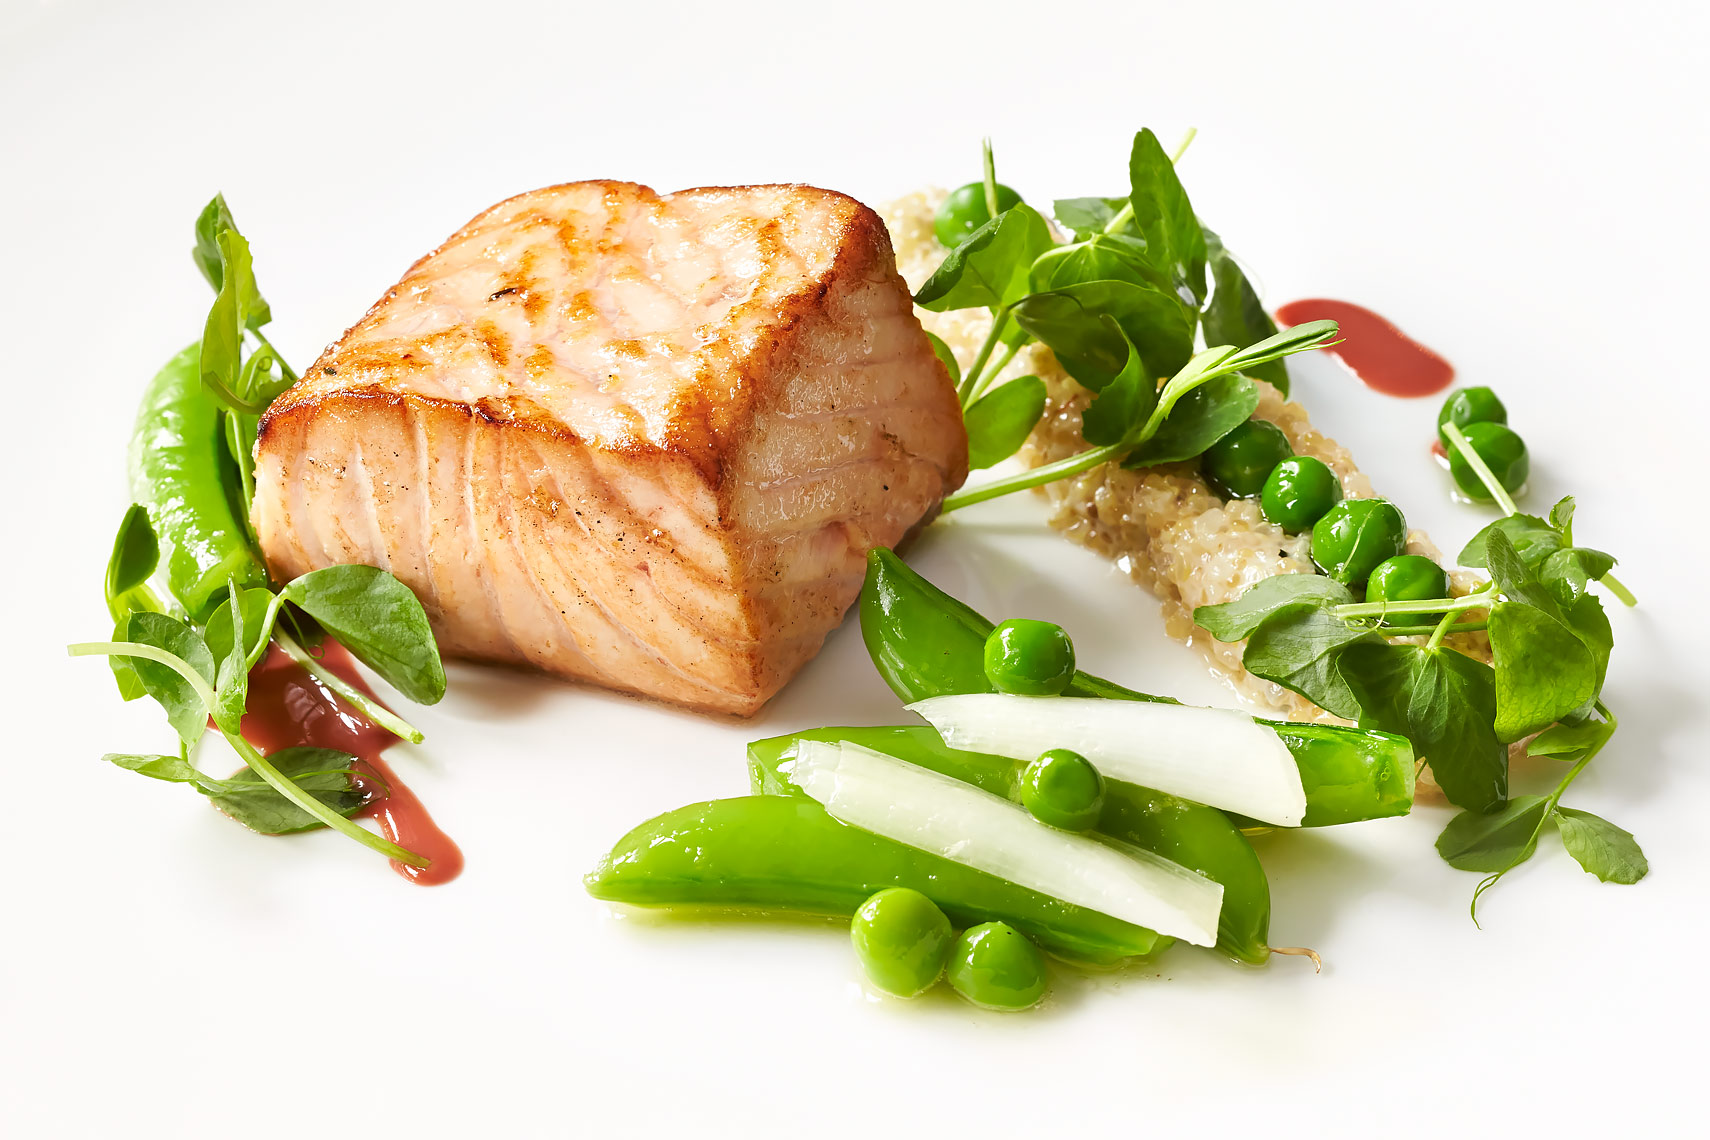 FOOD-DiningOut39-Capella-Grill-Room-Salmon